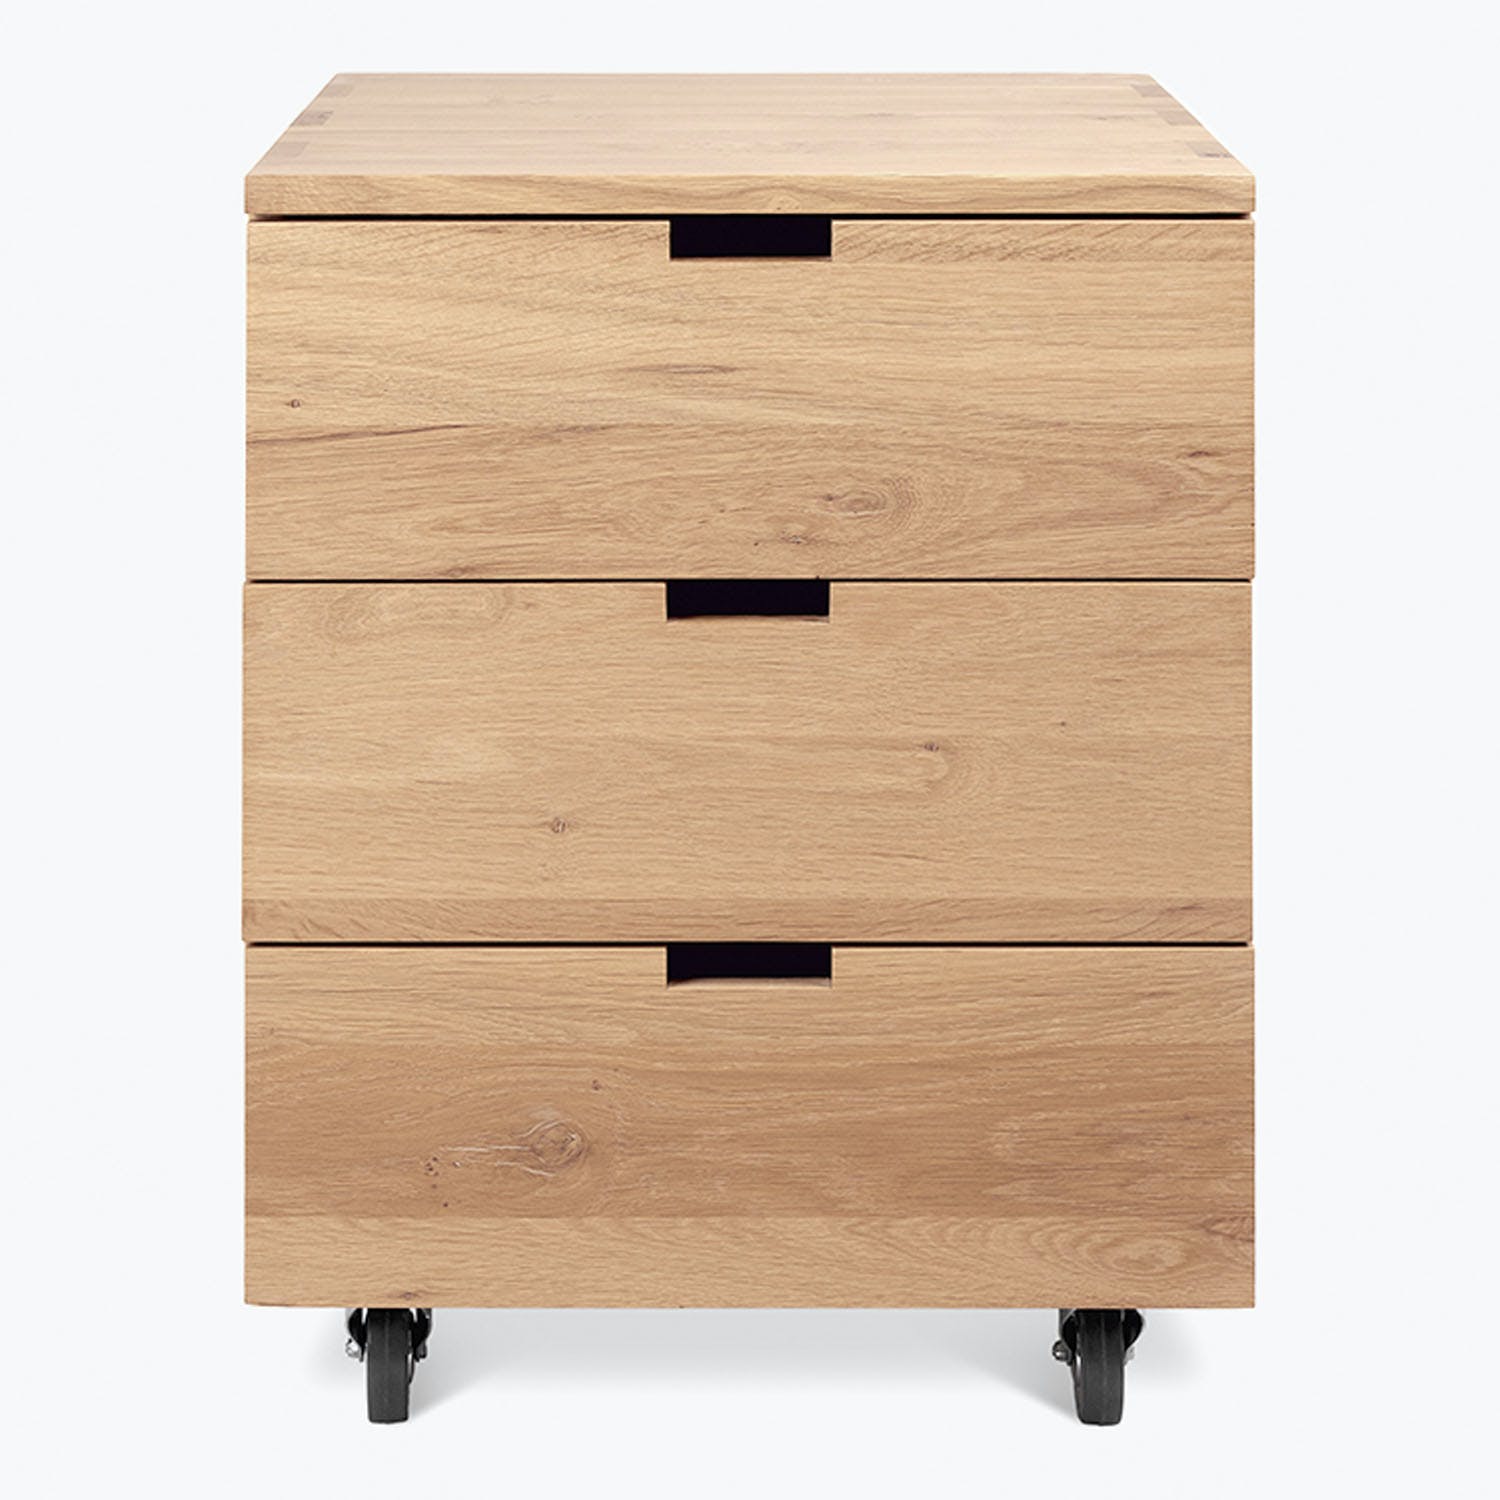 Modern wooden drawer unit with minimalist design and caster wheels